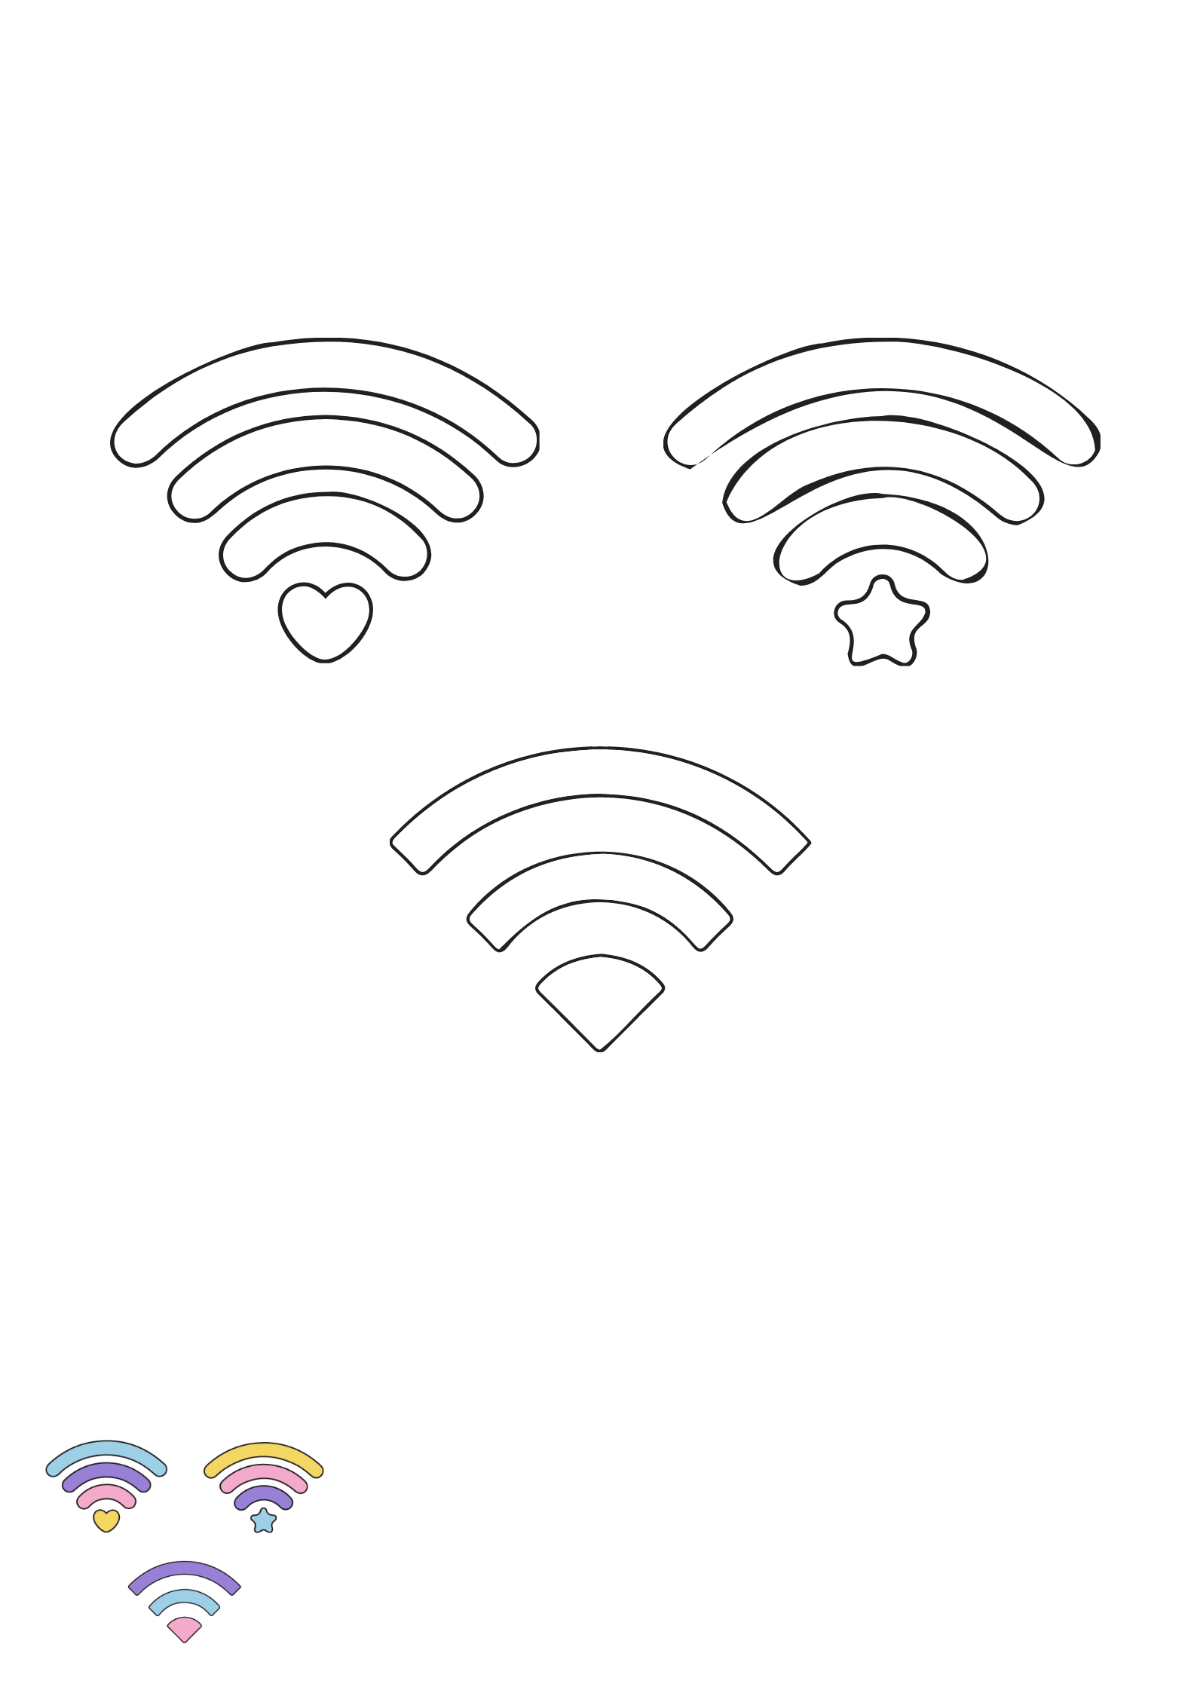 Free Cute Wifi Symbol coloring page Template